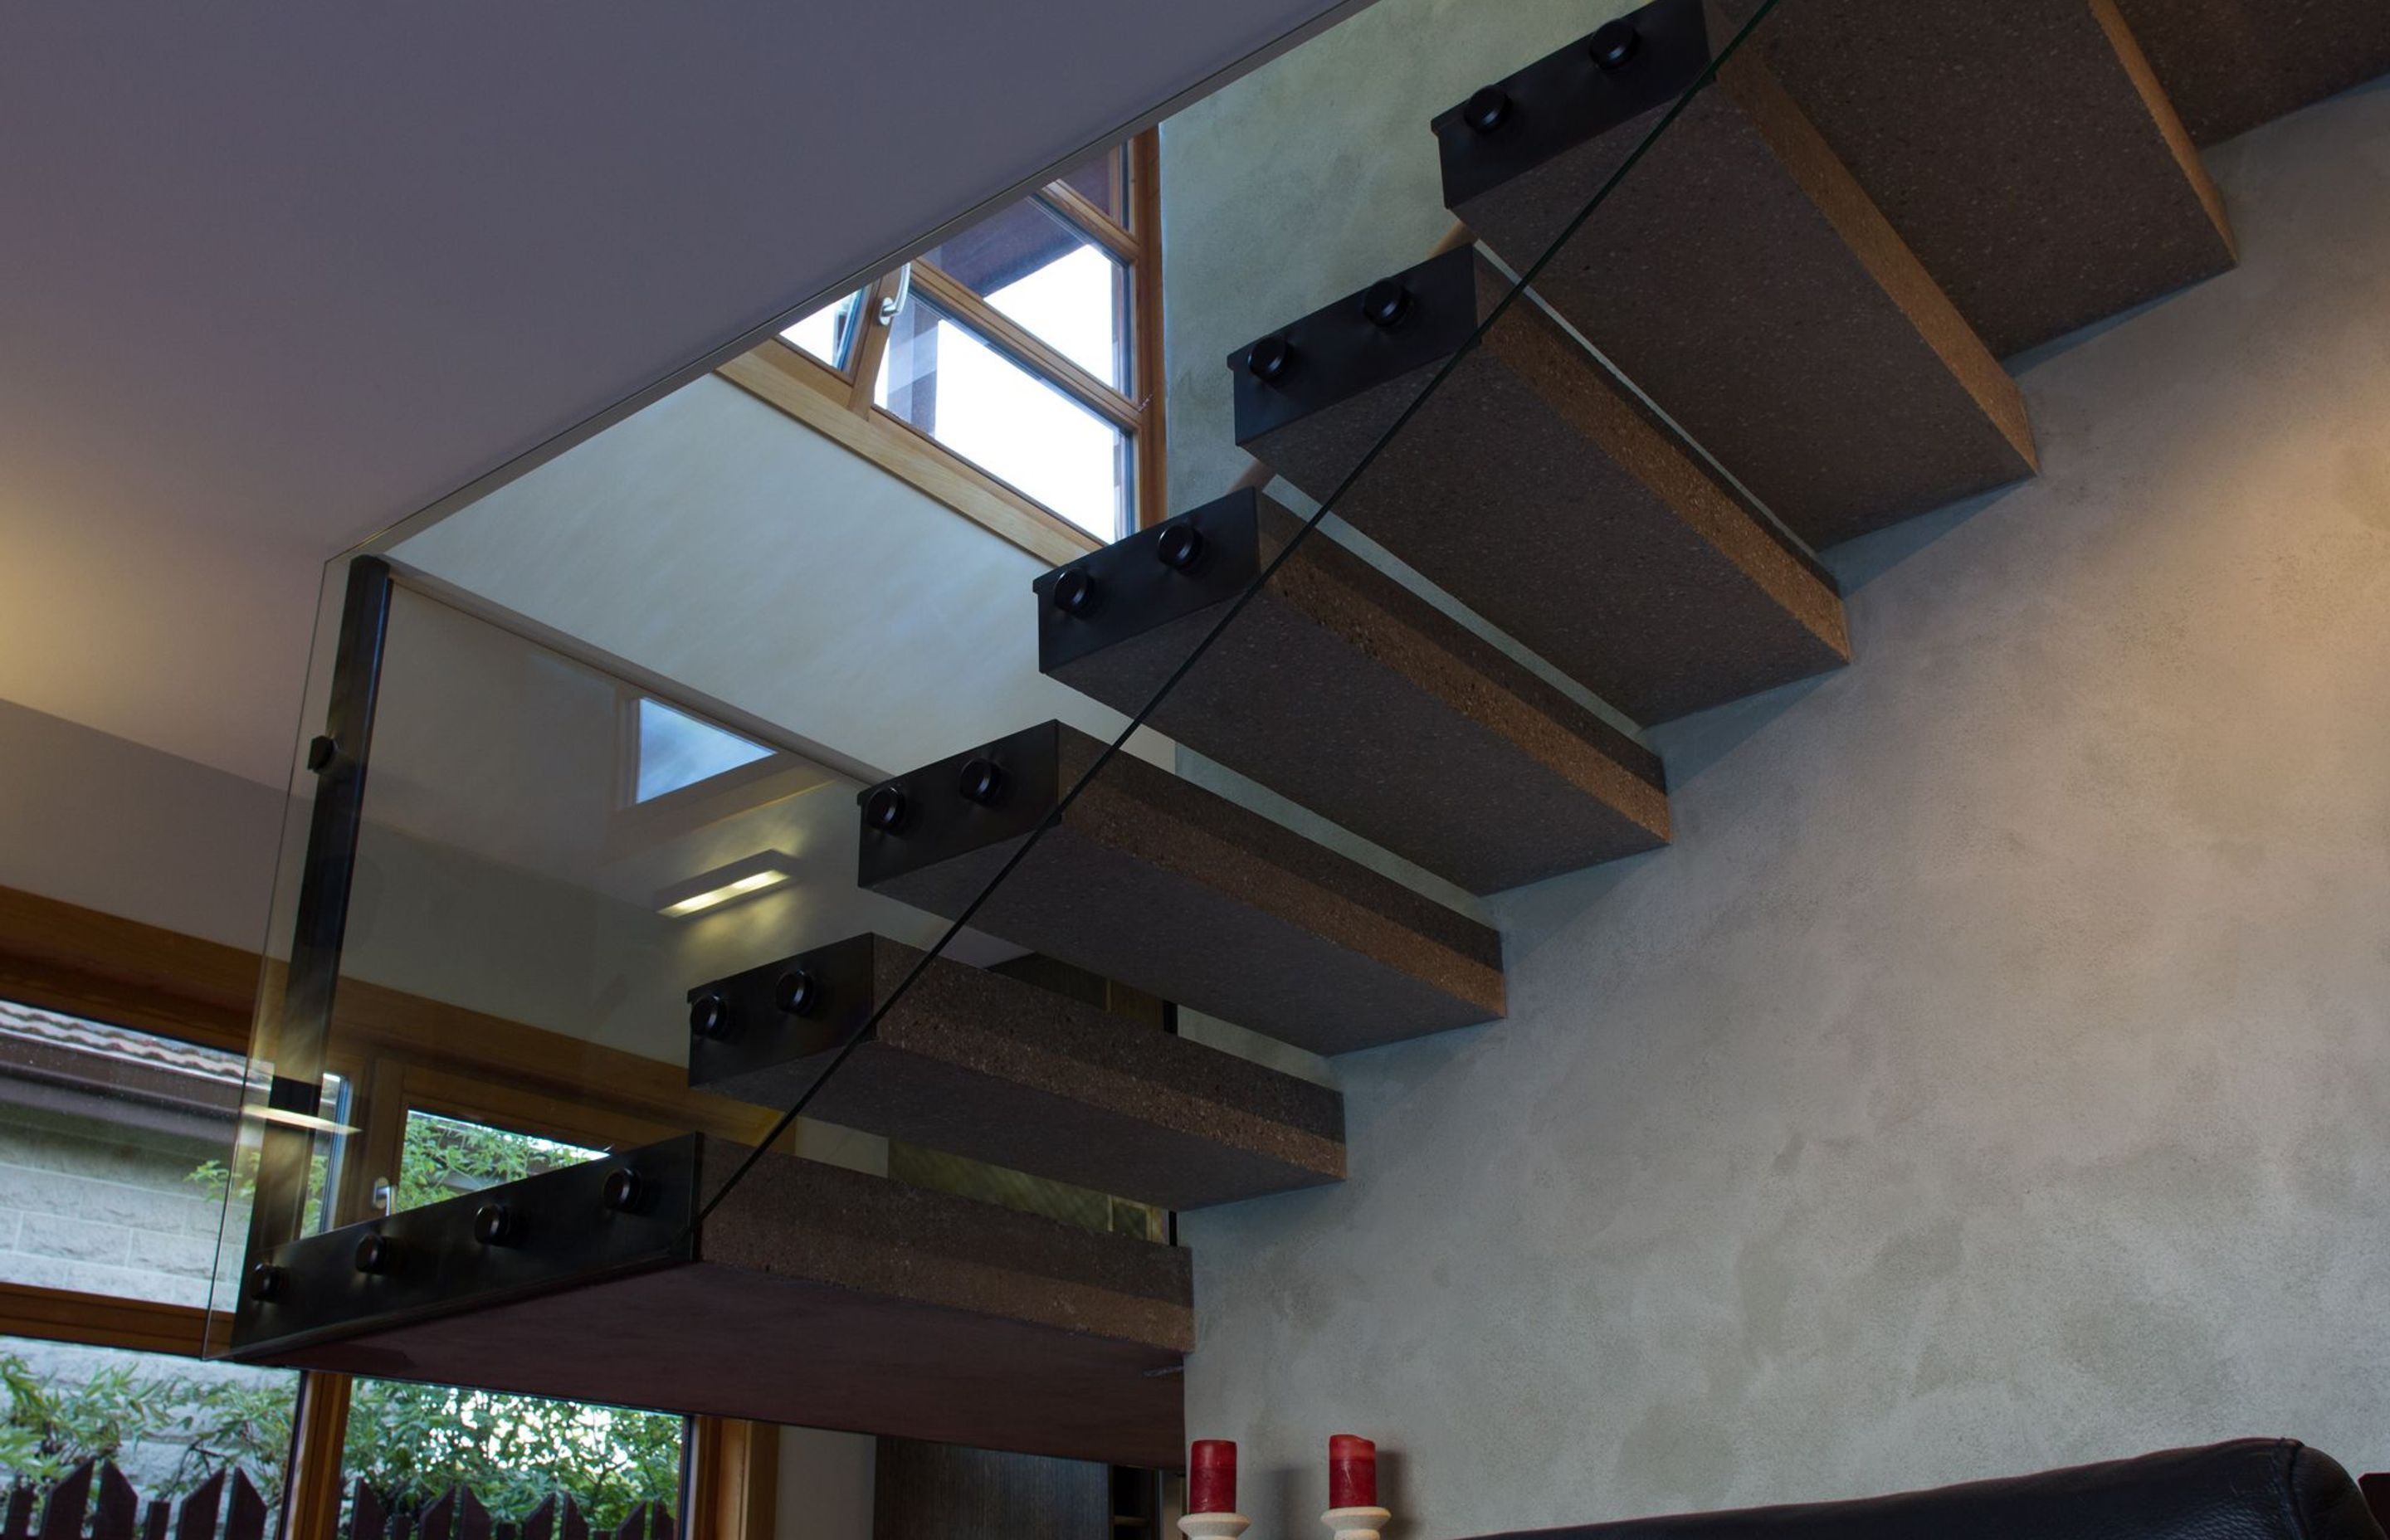 The concrete stairs 'float', hanging from the supporting wall.